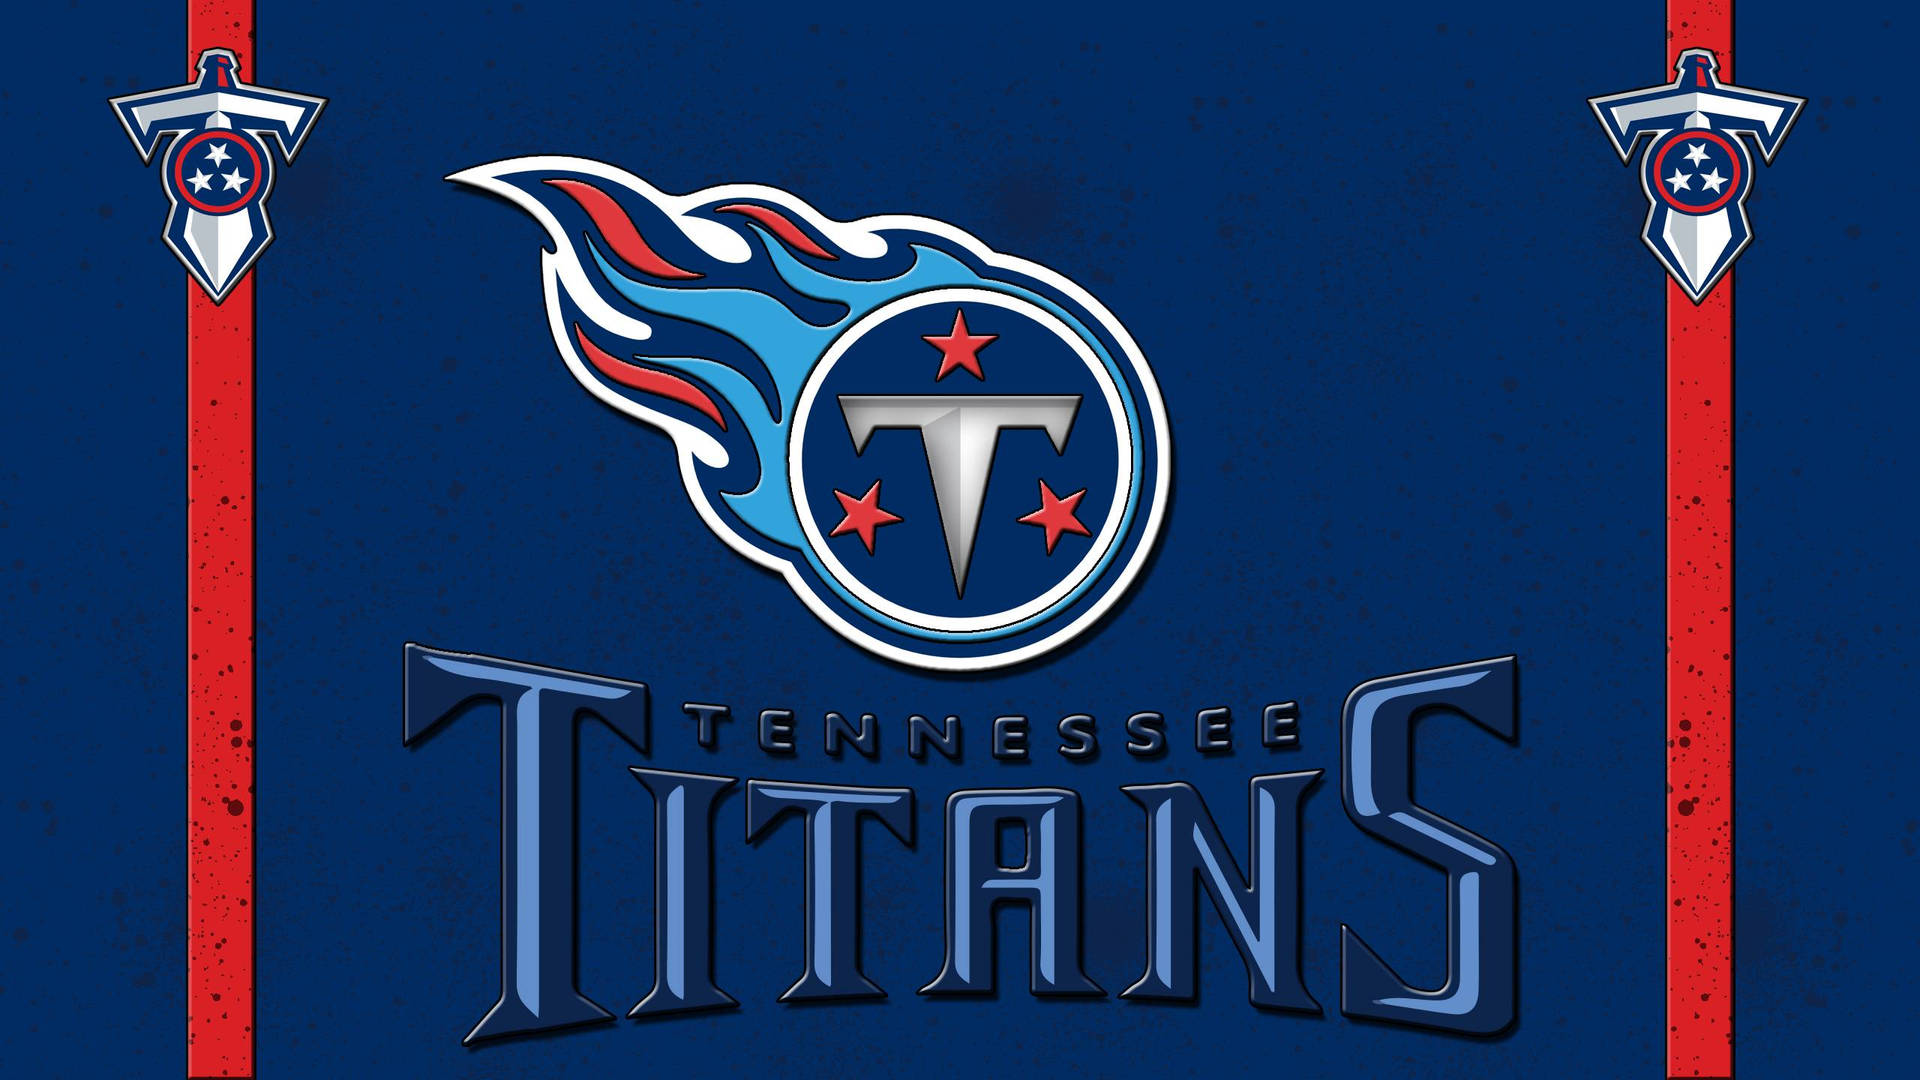 Tennessee Titans Sports Team Background